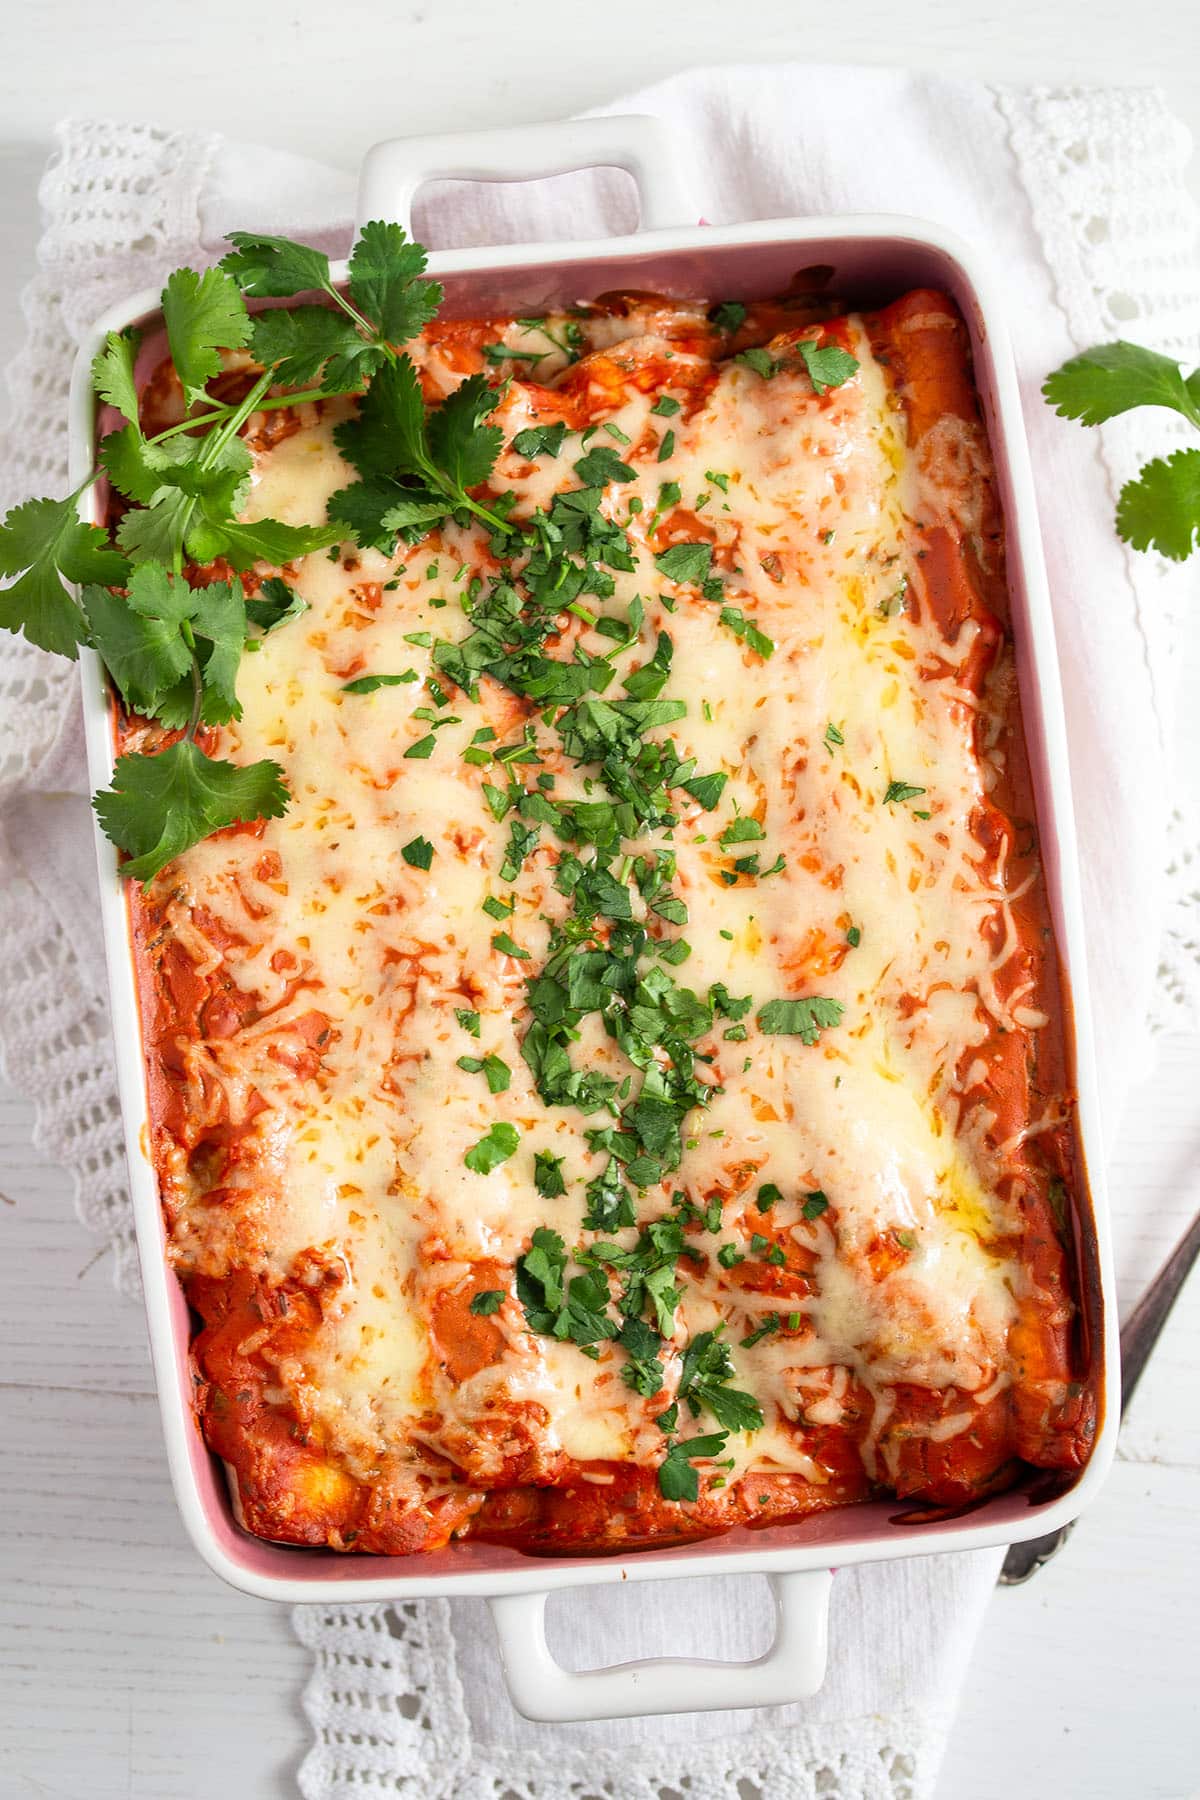 red sauce and sour cream enchiladas sprinkled with cilantro in a baking dish.